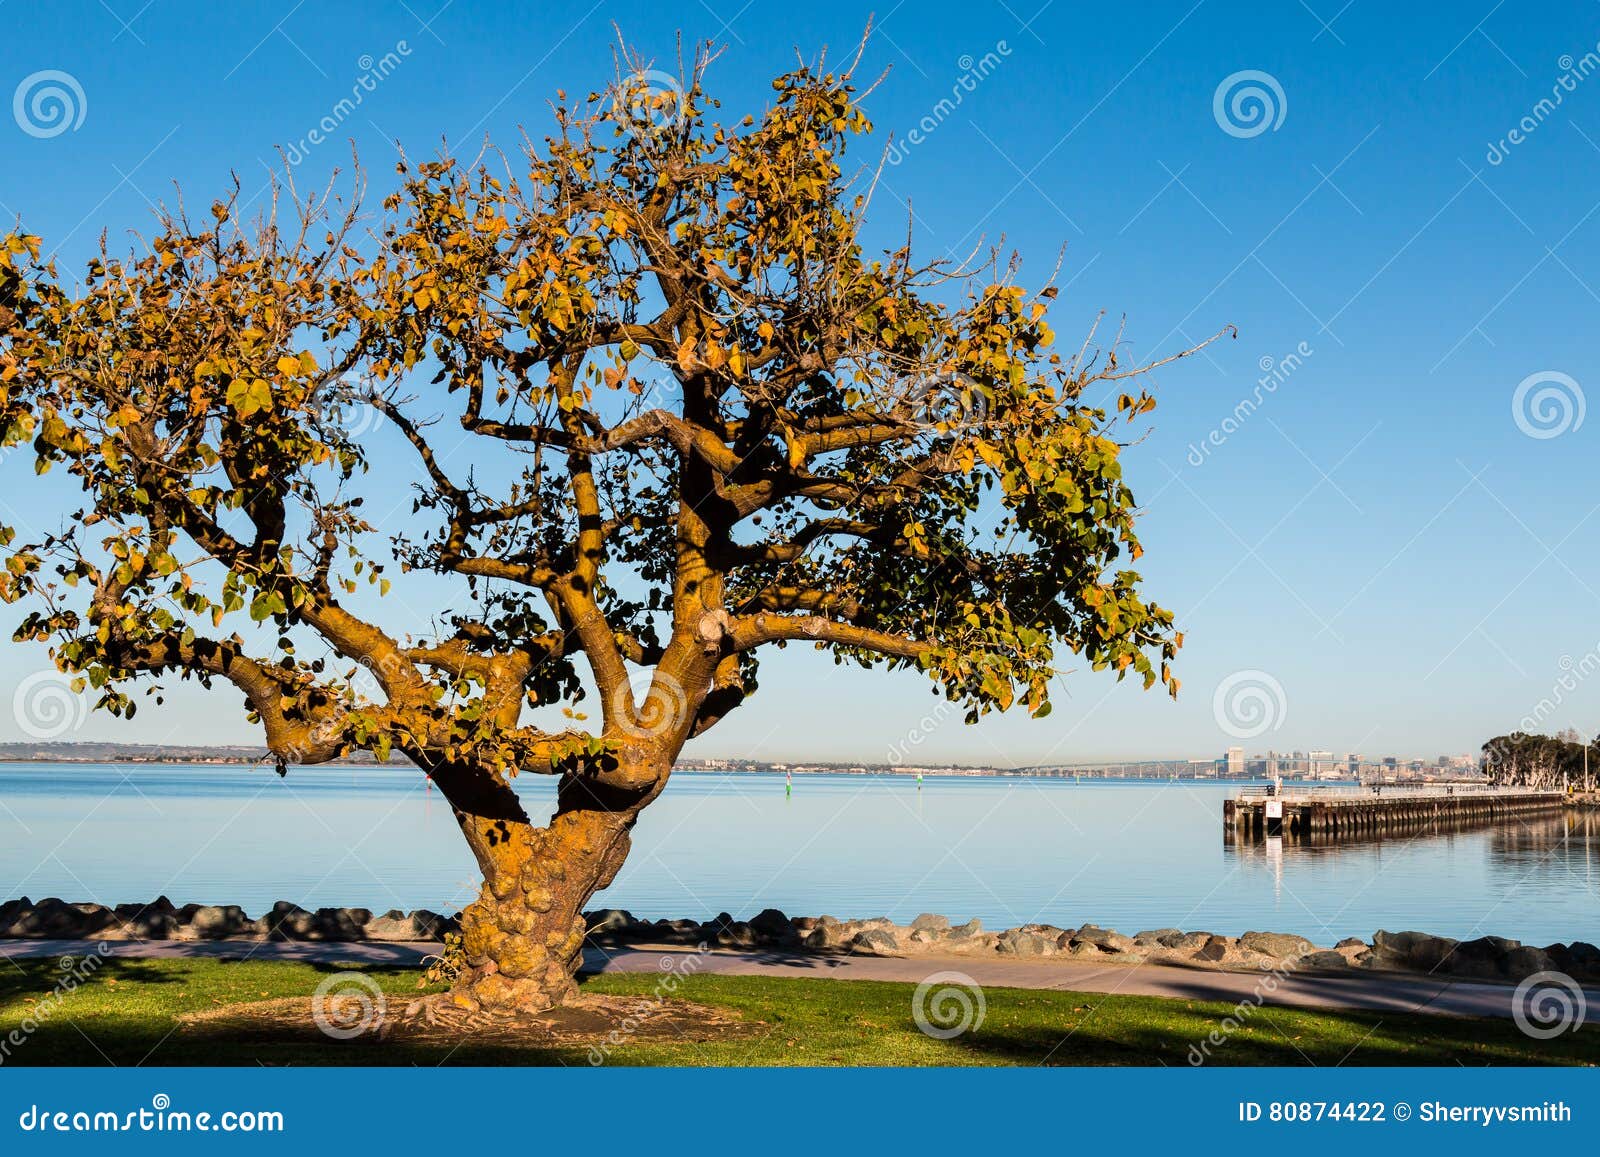 coral tree in chula vista with san diego bay